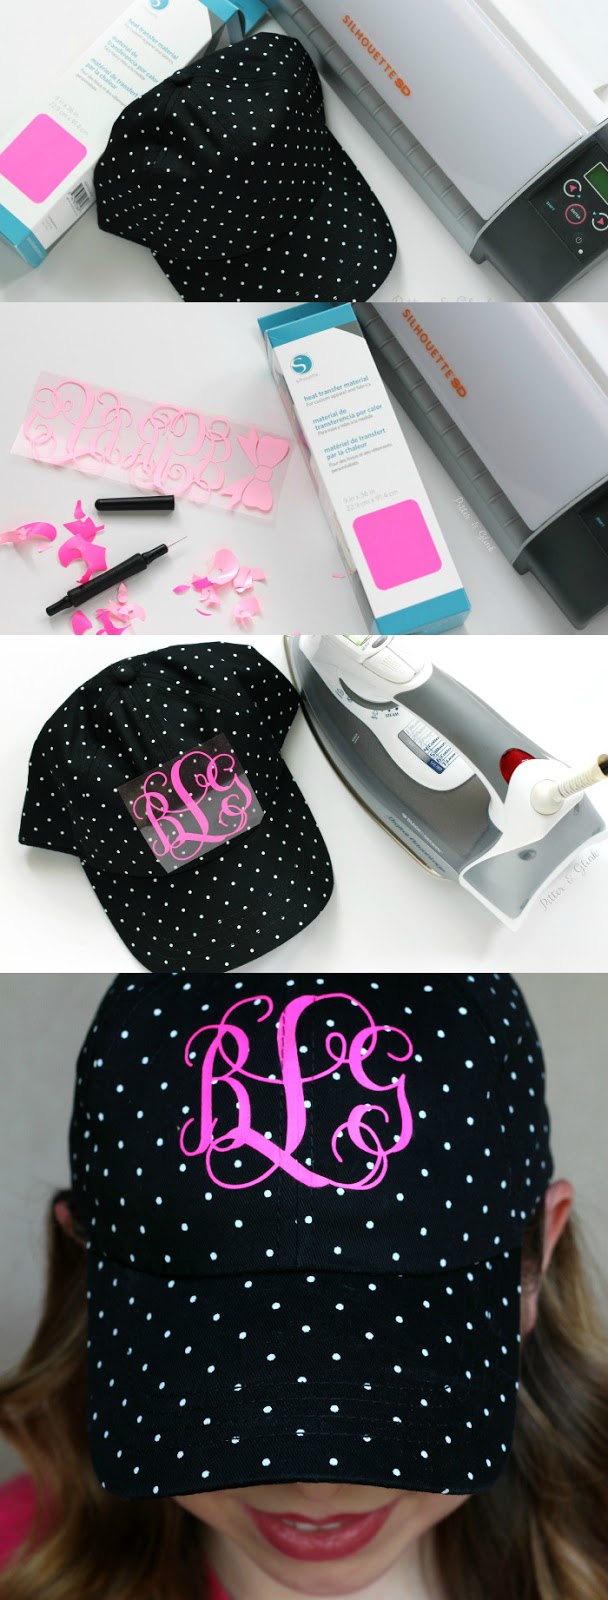 Make your own monogrammed baseball hat using a plain hat, heat transfer vinyl, and your Silhouette. www.pitterandglink.com